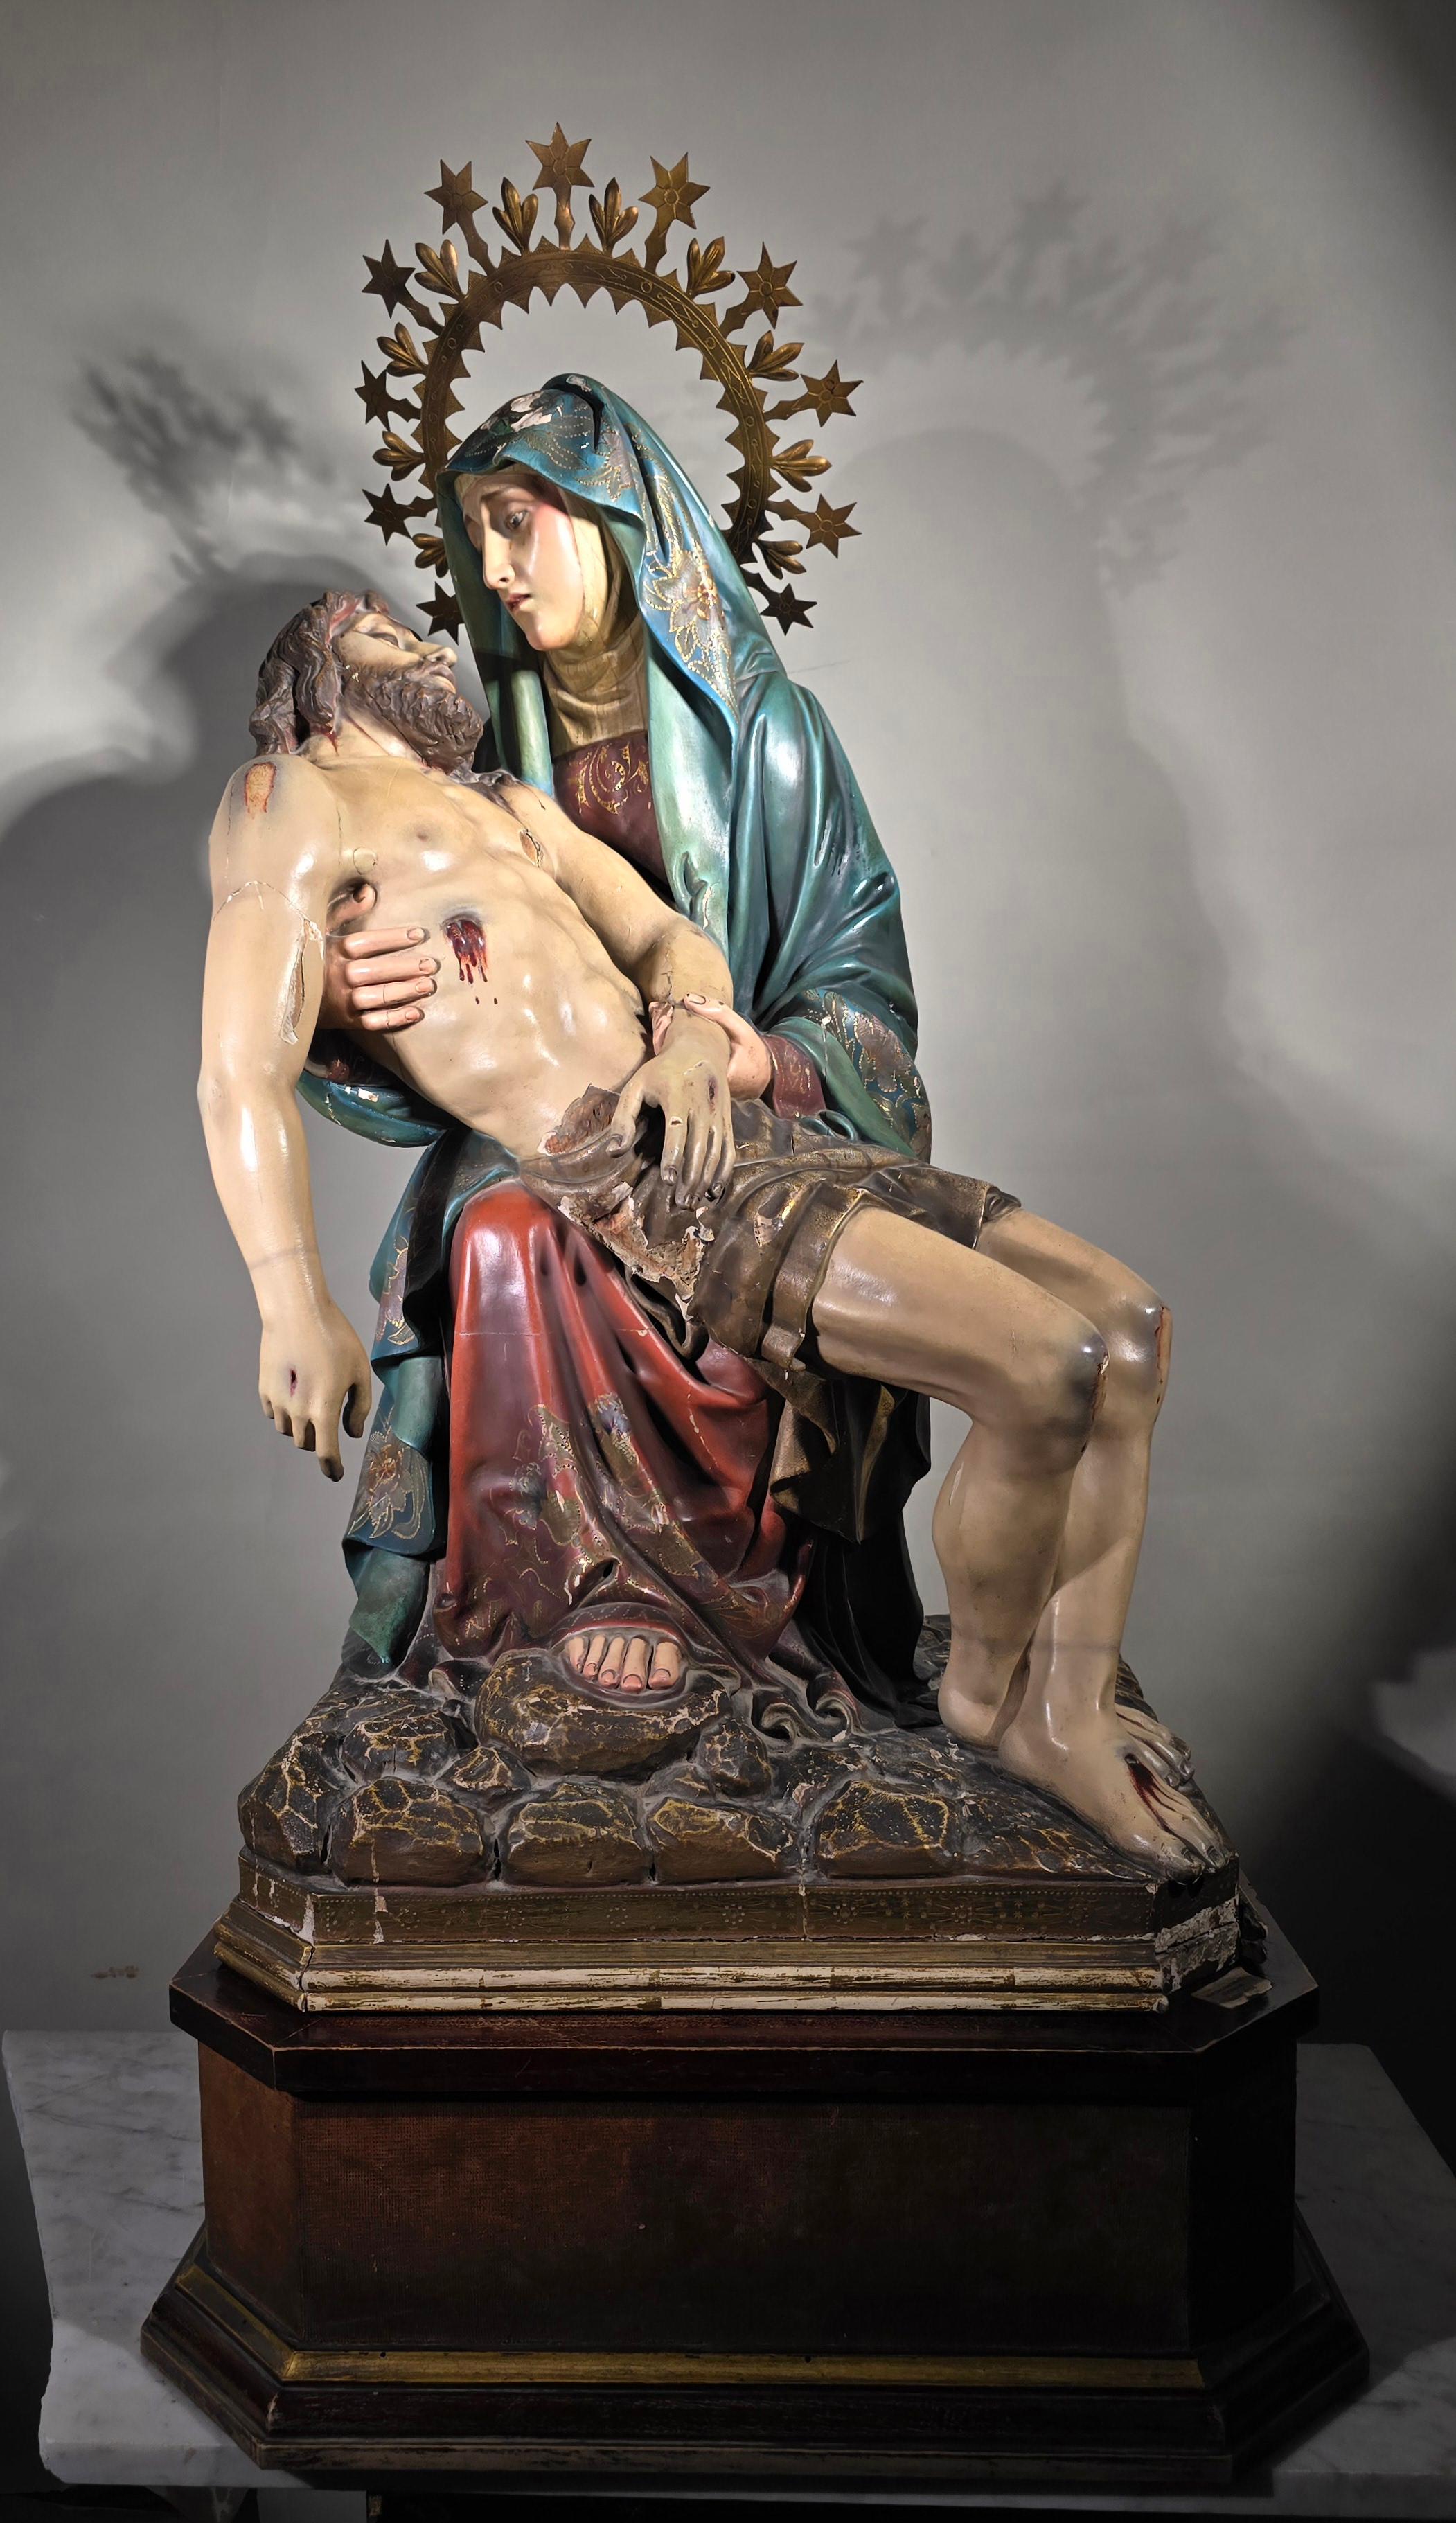 Immerse yourself in the poignant beauty of this significant carved wood and polychrome sculpture depicting the iconic scene of the Pieta. Crafted possibly in Spain during the 19th century, this artwork stands as a striking testament to sacred art